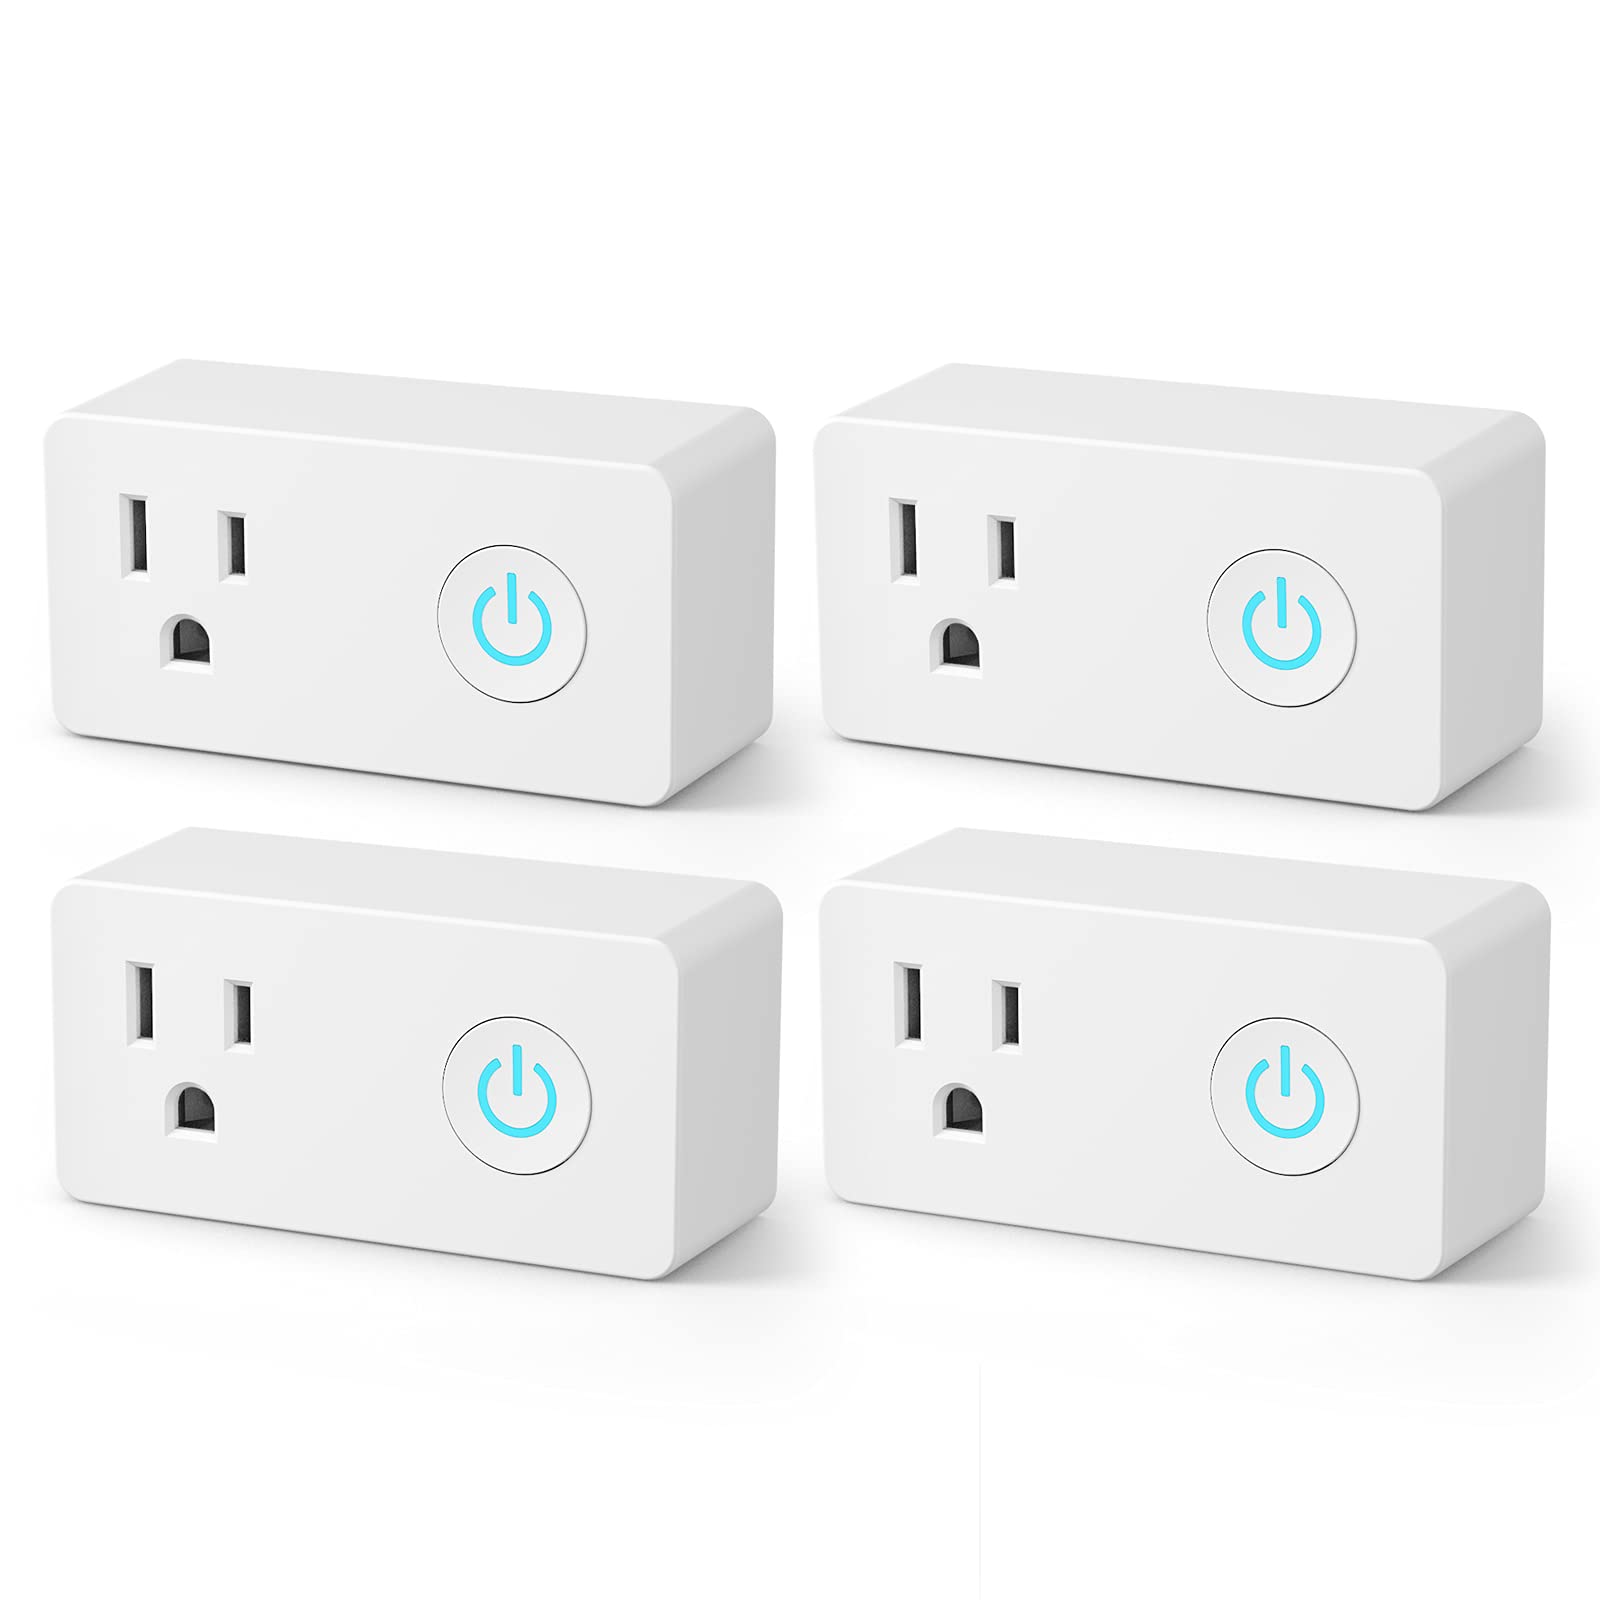 Save 20% on highly-rated BN-LINK indoor and outdoor smart plugs